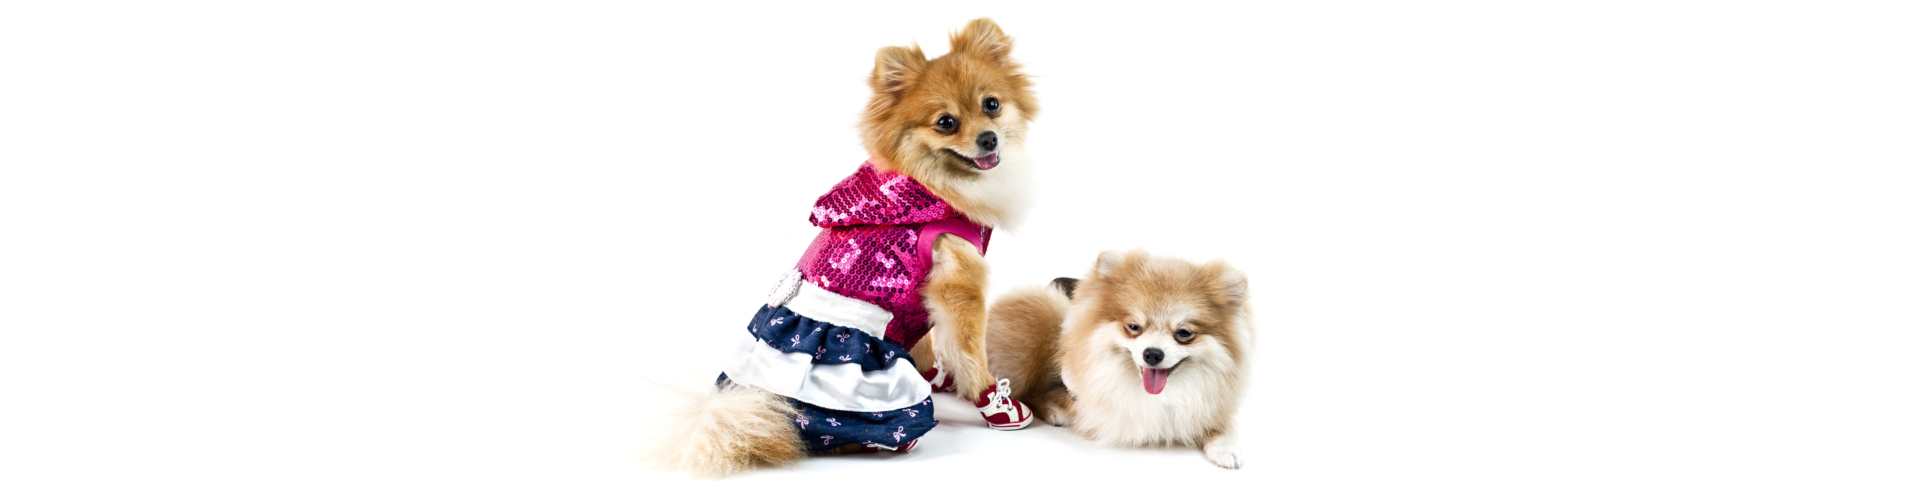 The two cute Pomeranian dog over white one dressed up